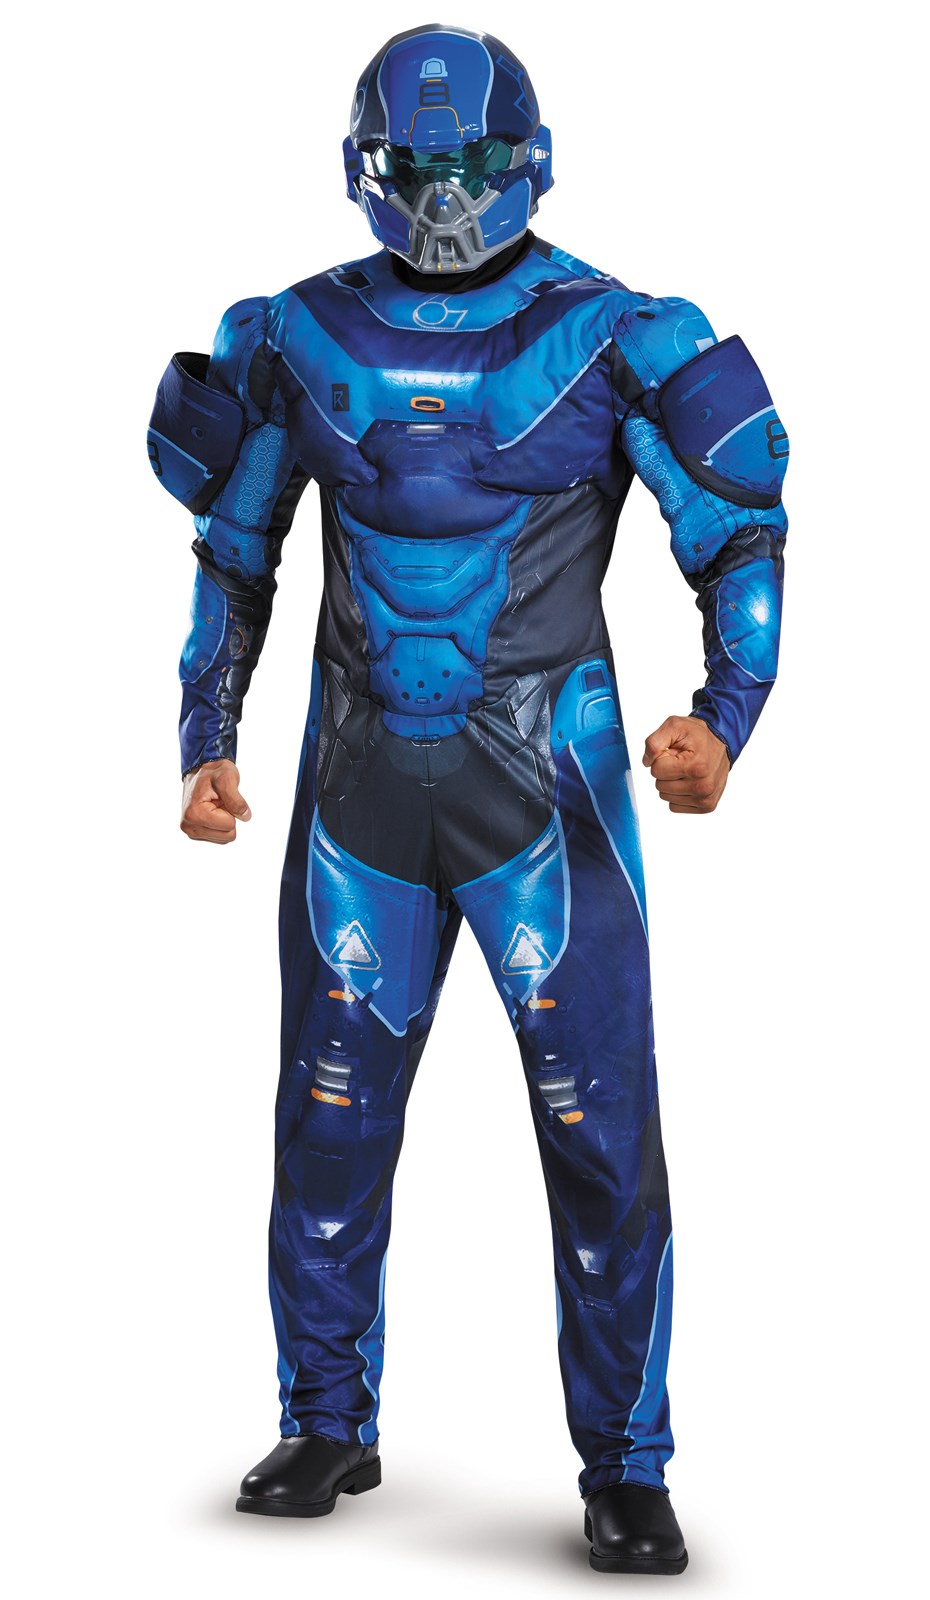 Halo - Blue Spartan Deluxe Adult Costume